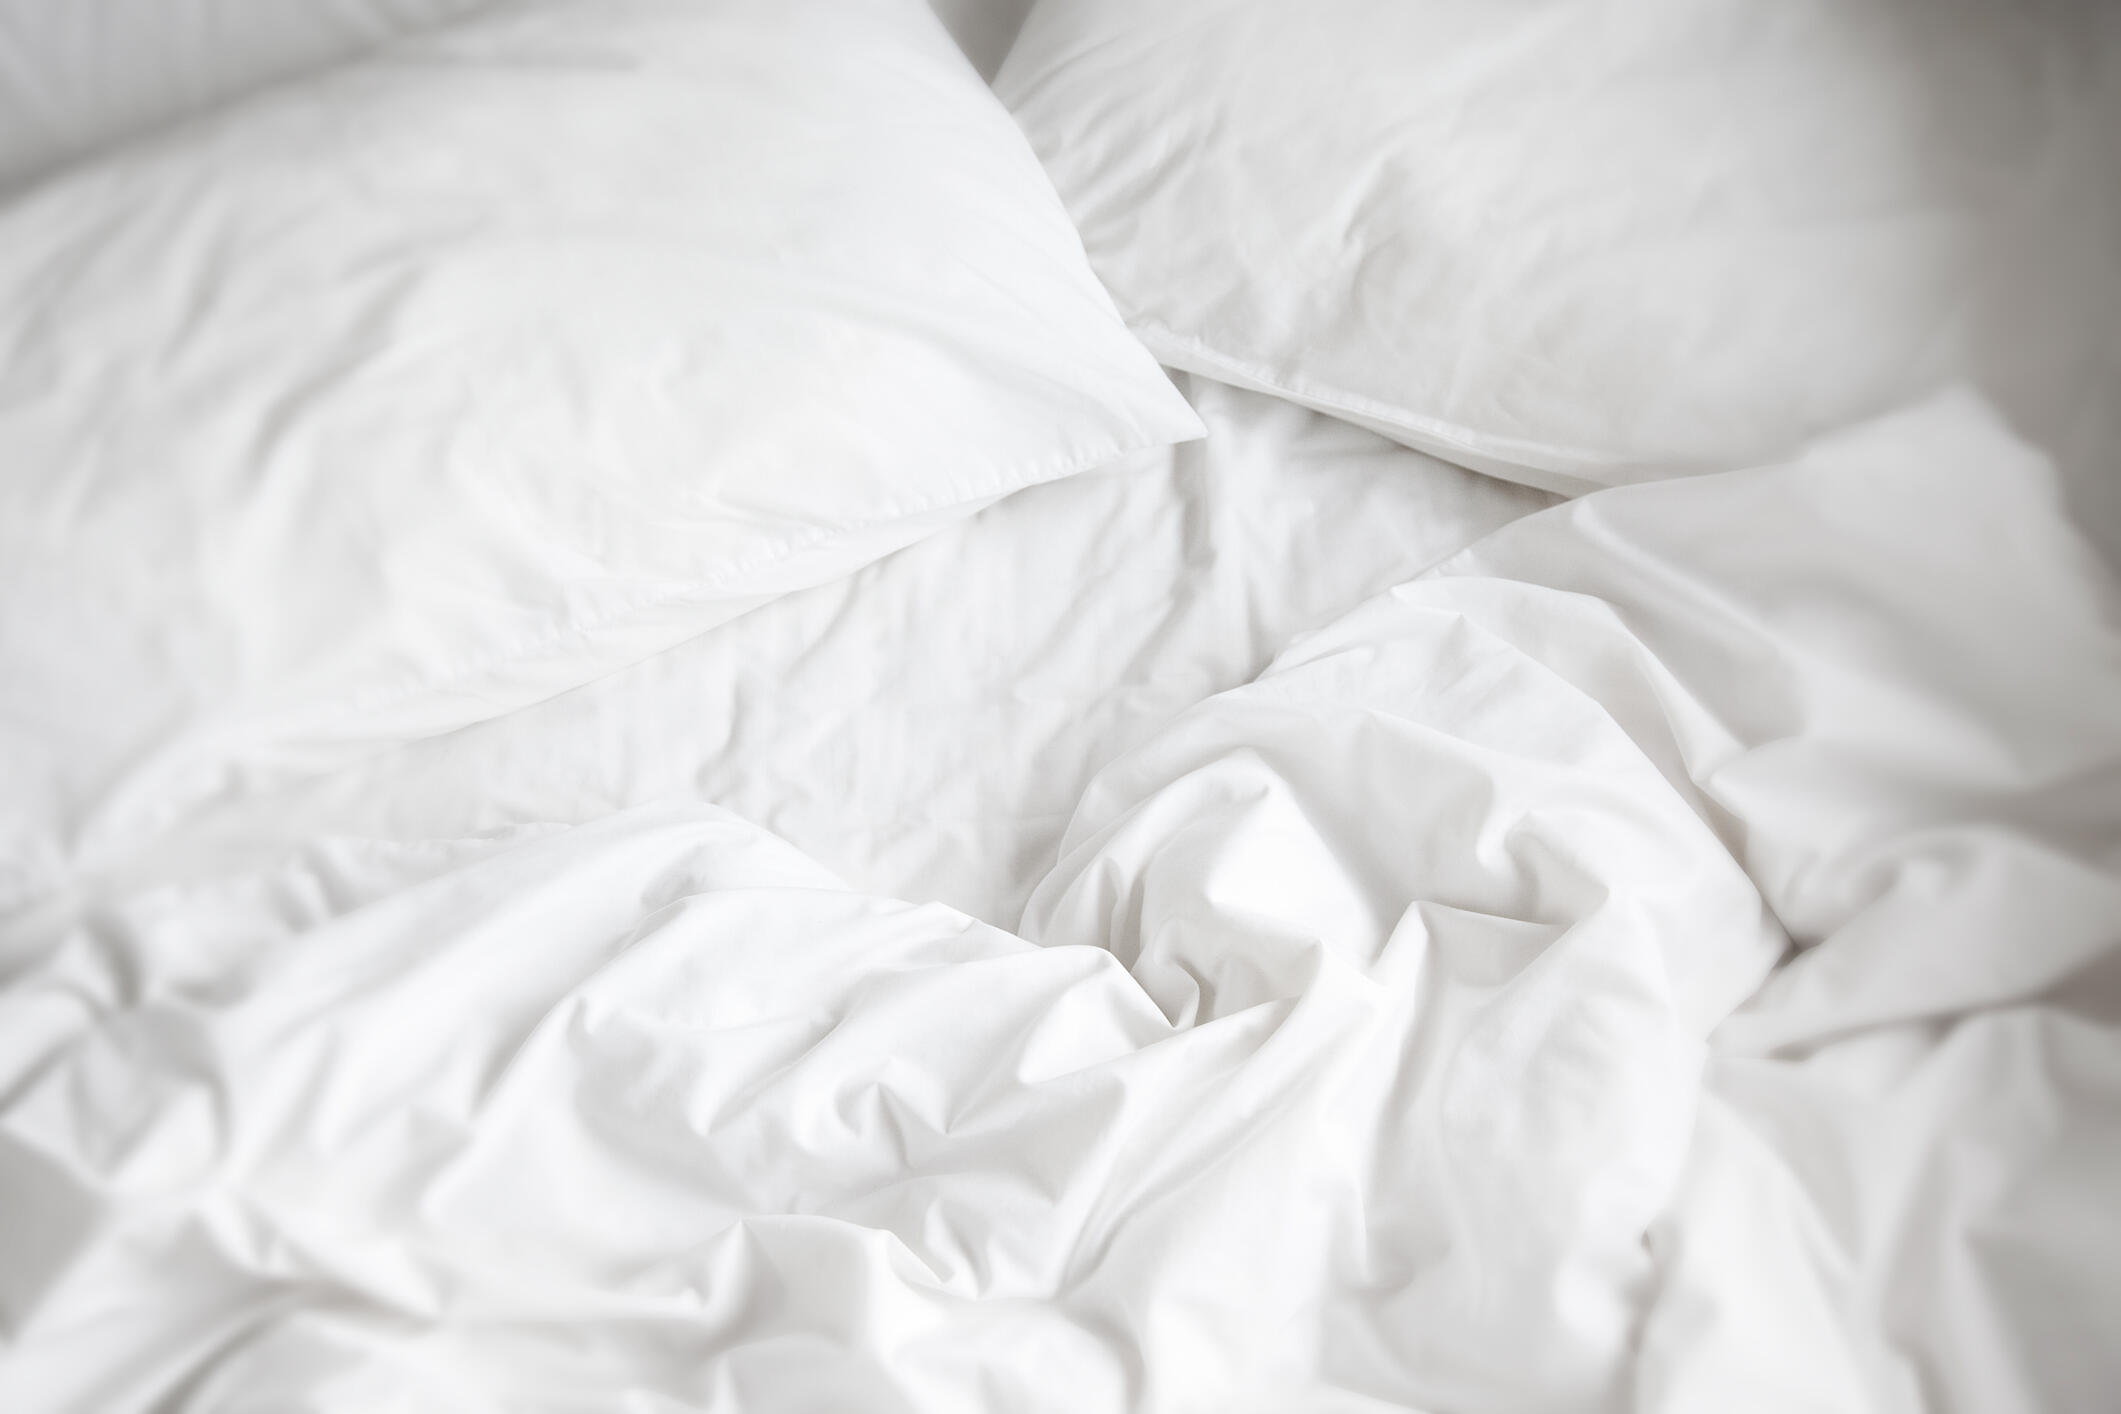 A pair of clean white sheets, a comfy white comforter and fluffy pillows.